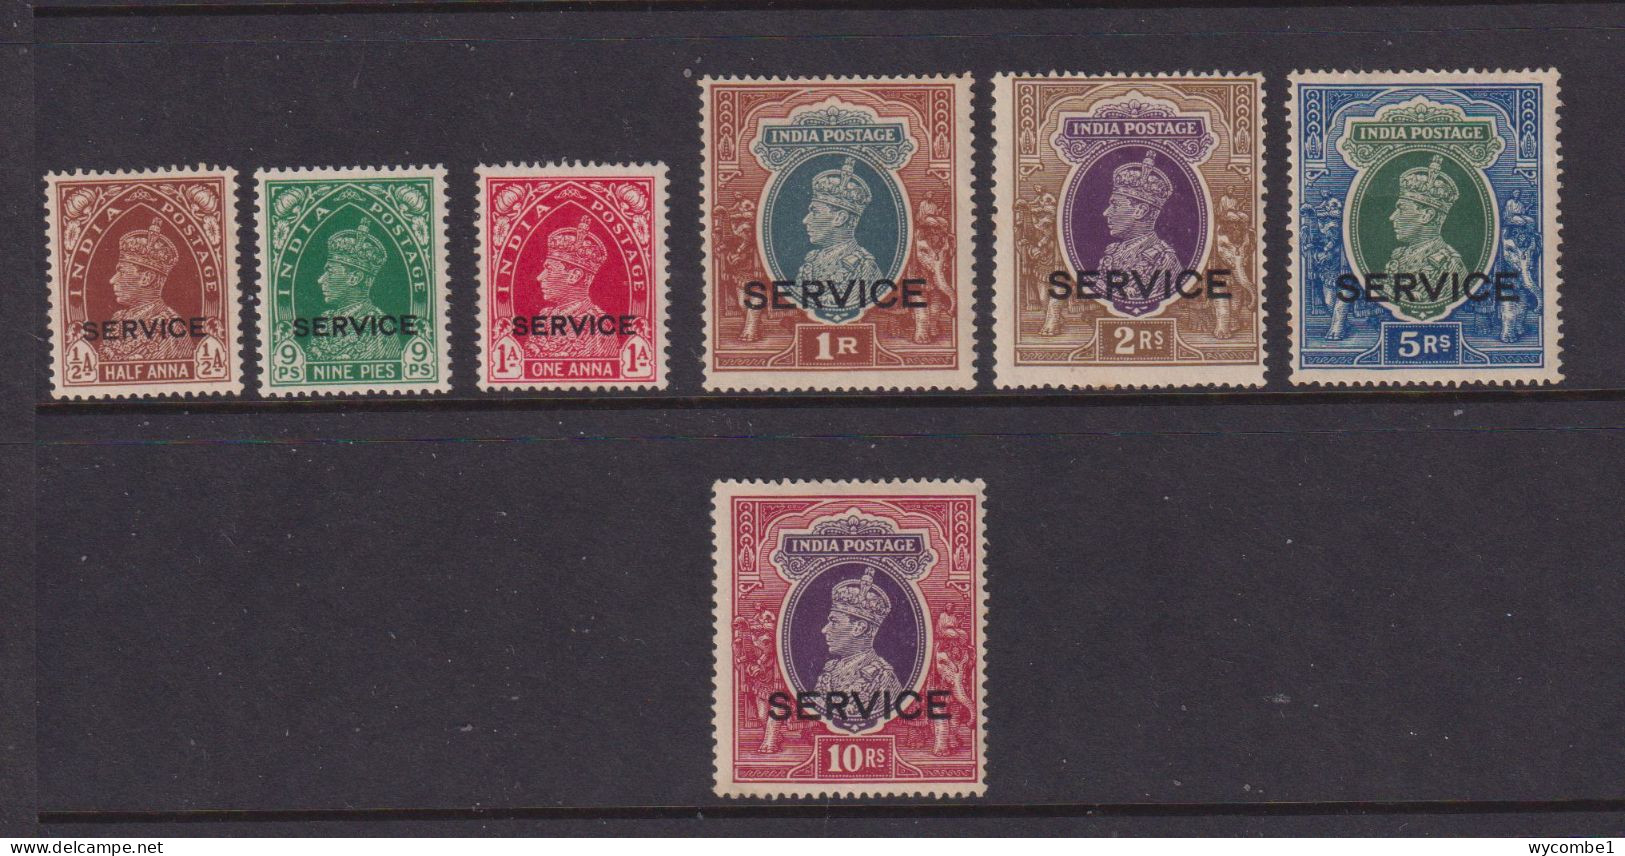 INDIA - 1937 George VI Official Opt Service Set Hinged Mint - 1936-47 Roi Georges VI